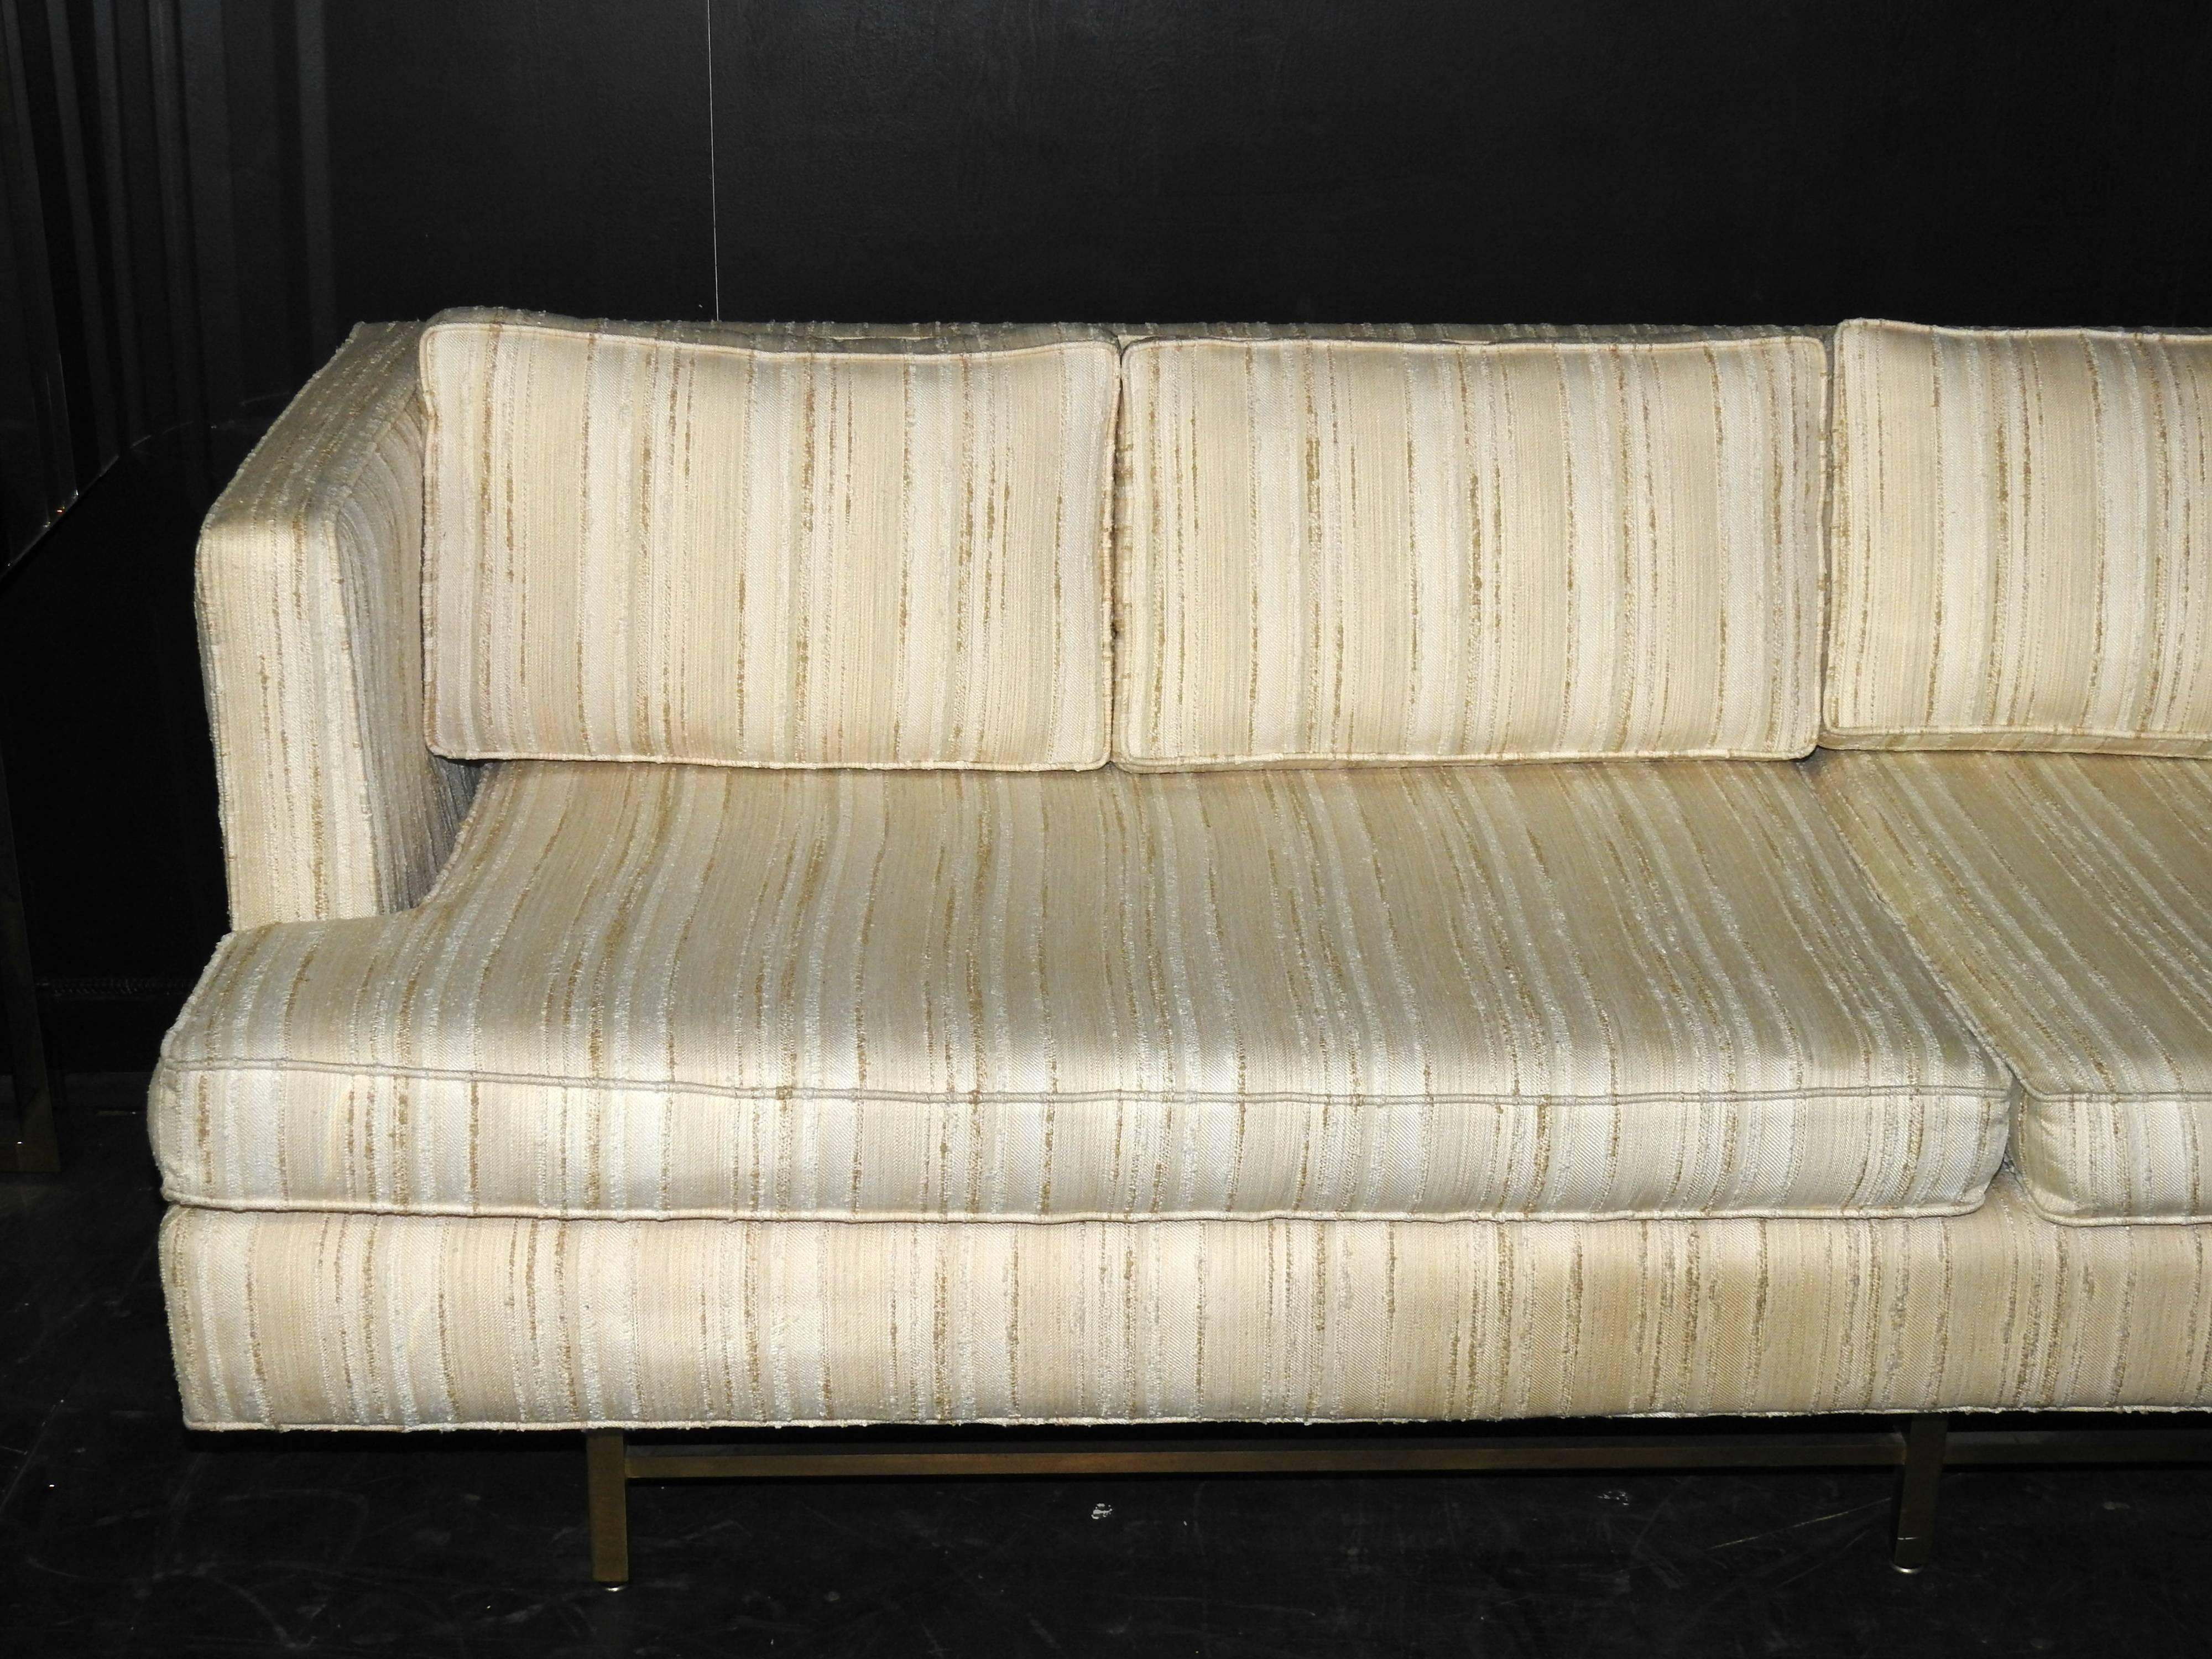 This outstanding Mid-Century Modern couch / sofa by John Stuart with four removable back cushions and two removable main cushions sits on a brass base.

This couch was procured from the original purchaser and has been re-upholstered since